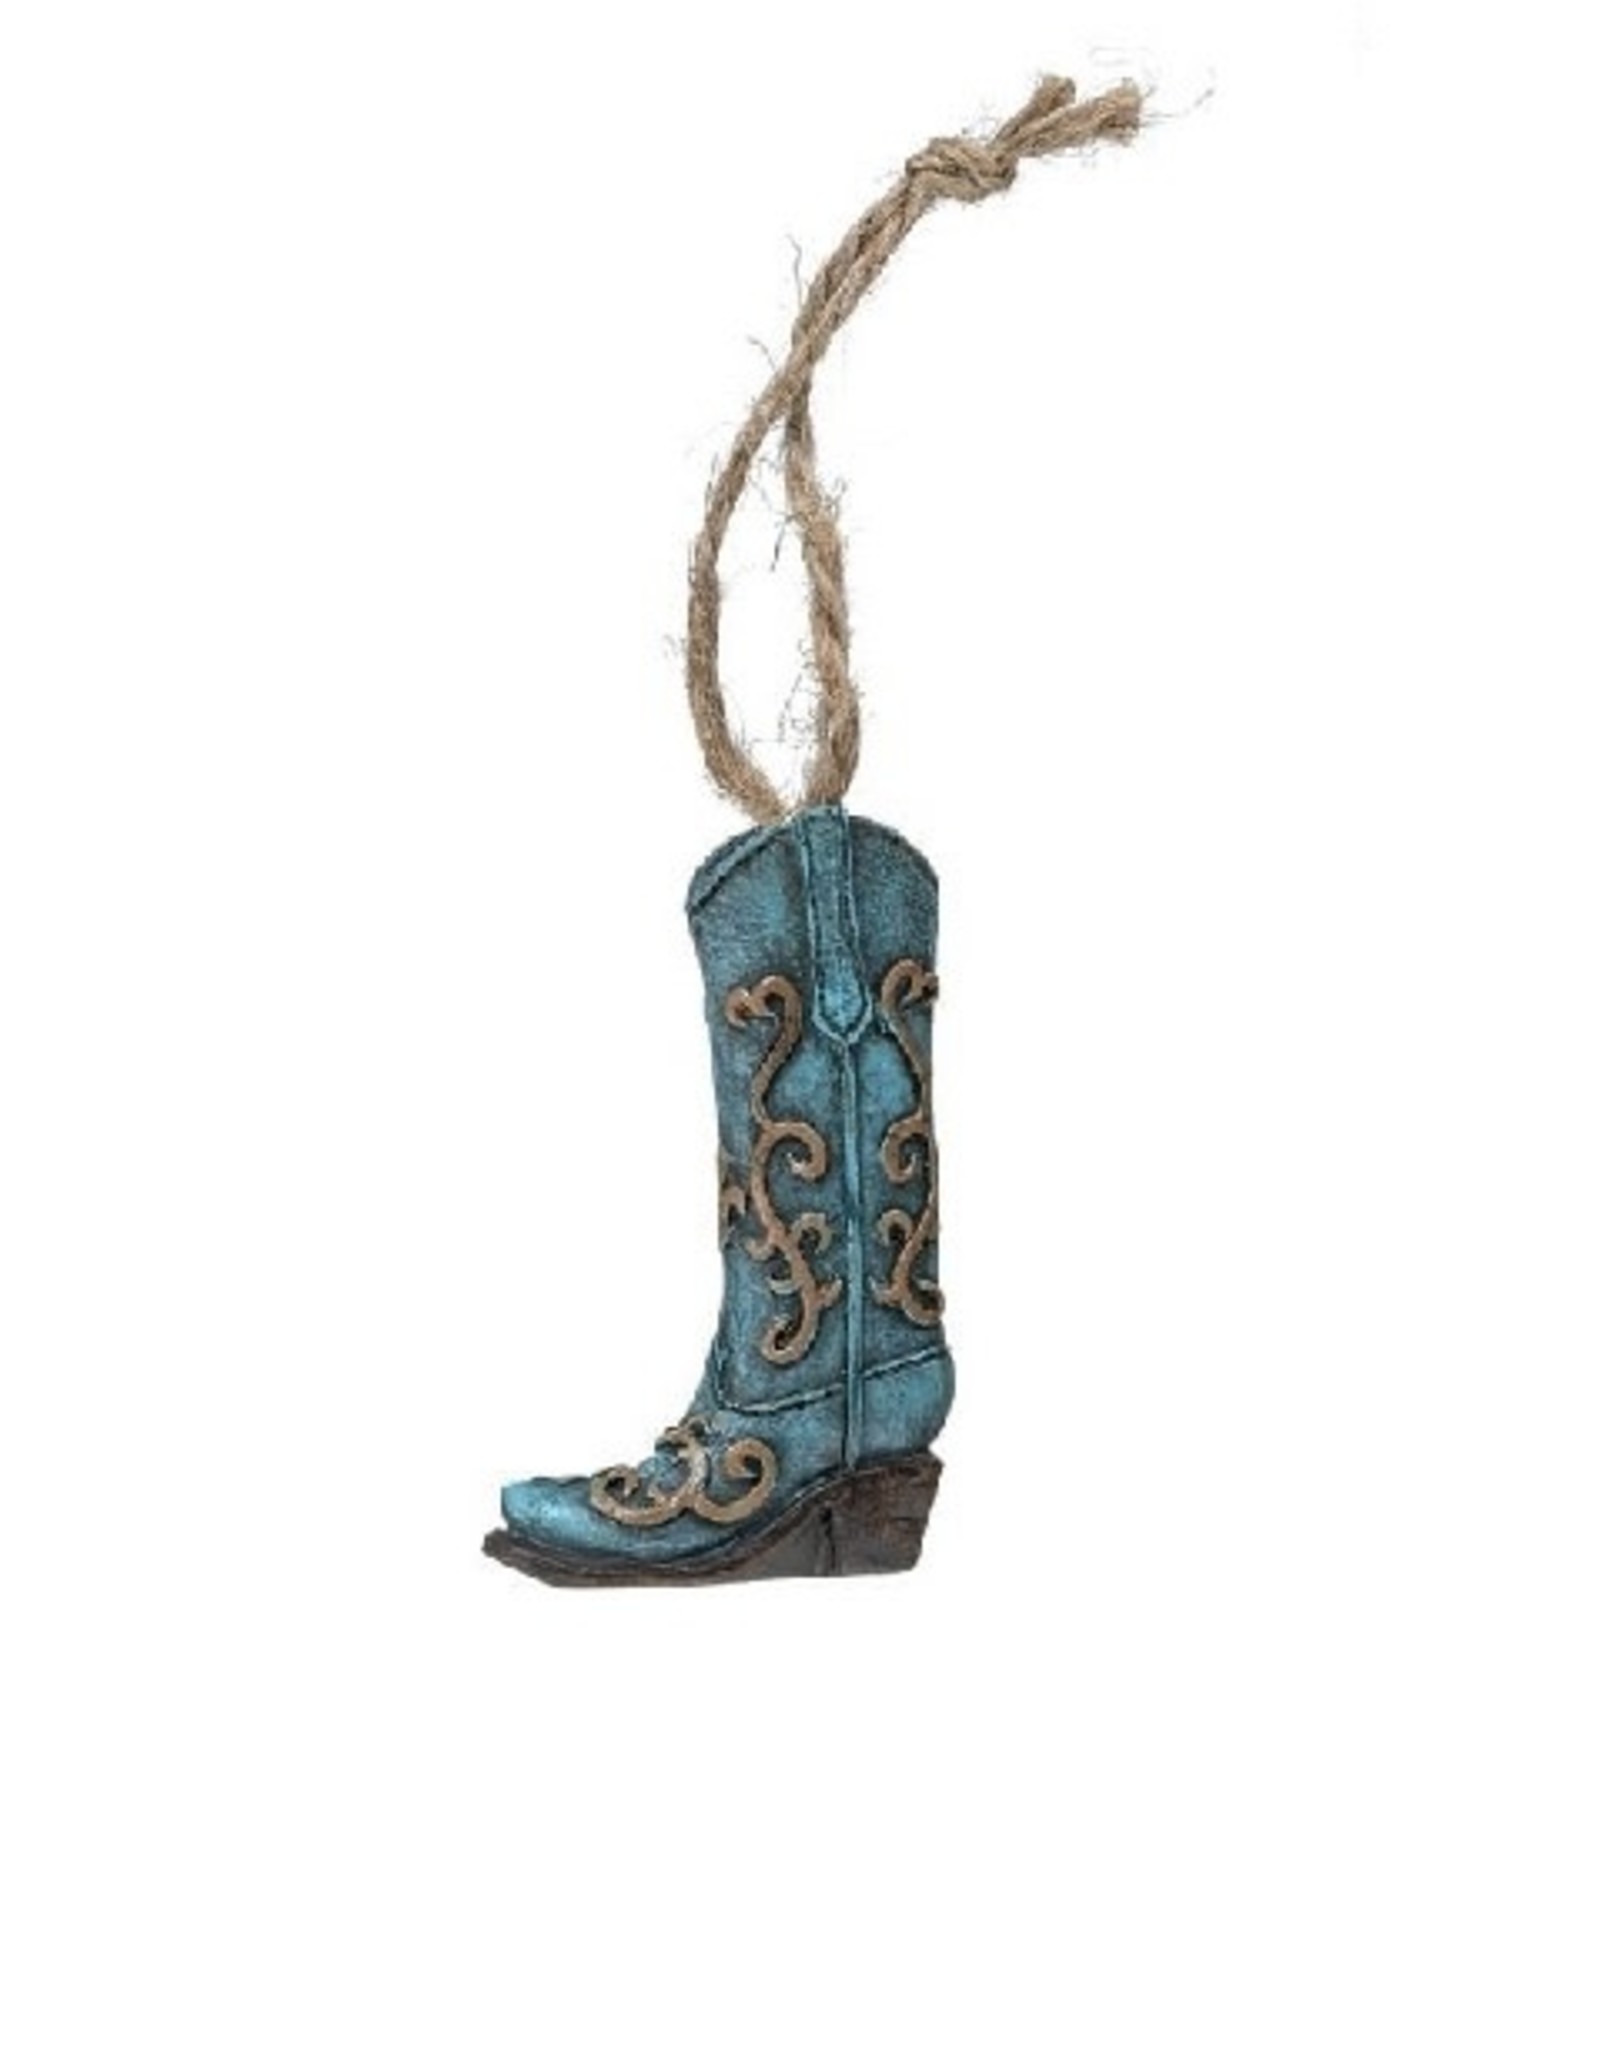 Resin Turquoise Cowboy Boot Ornament